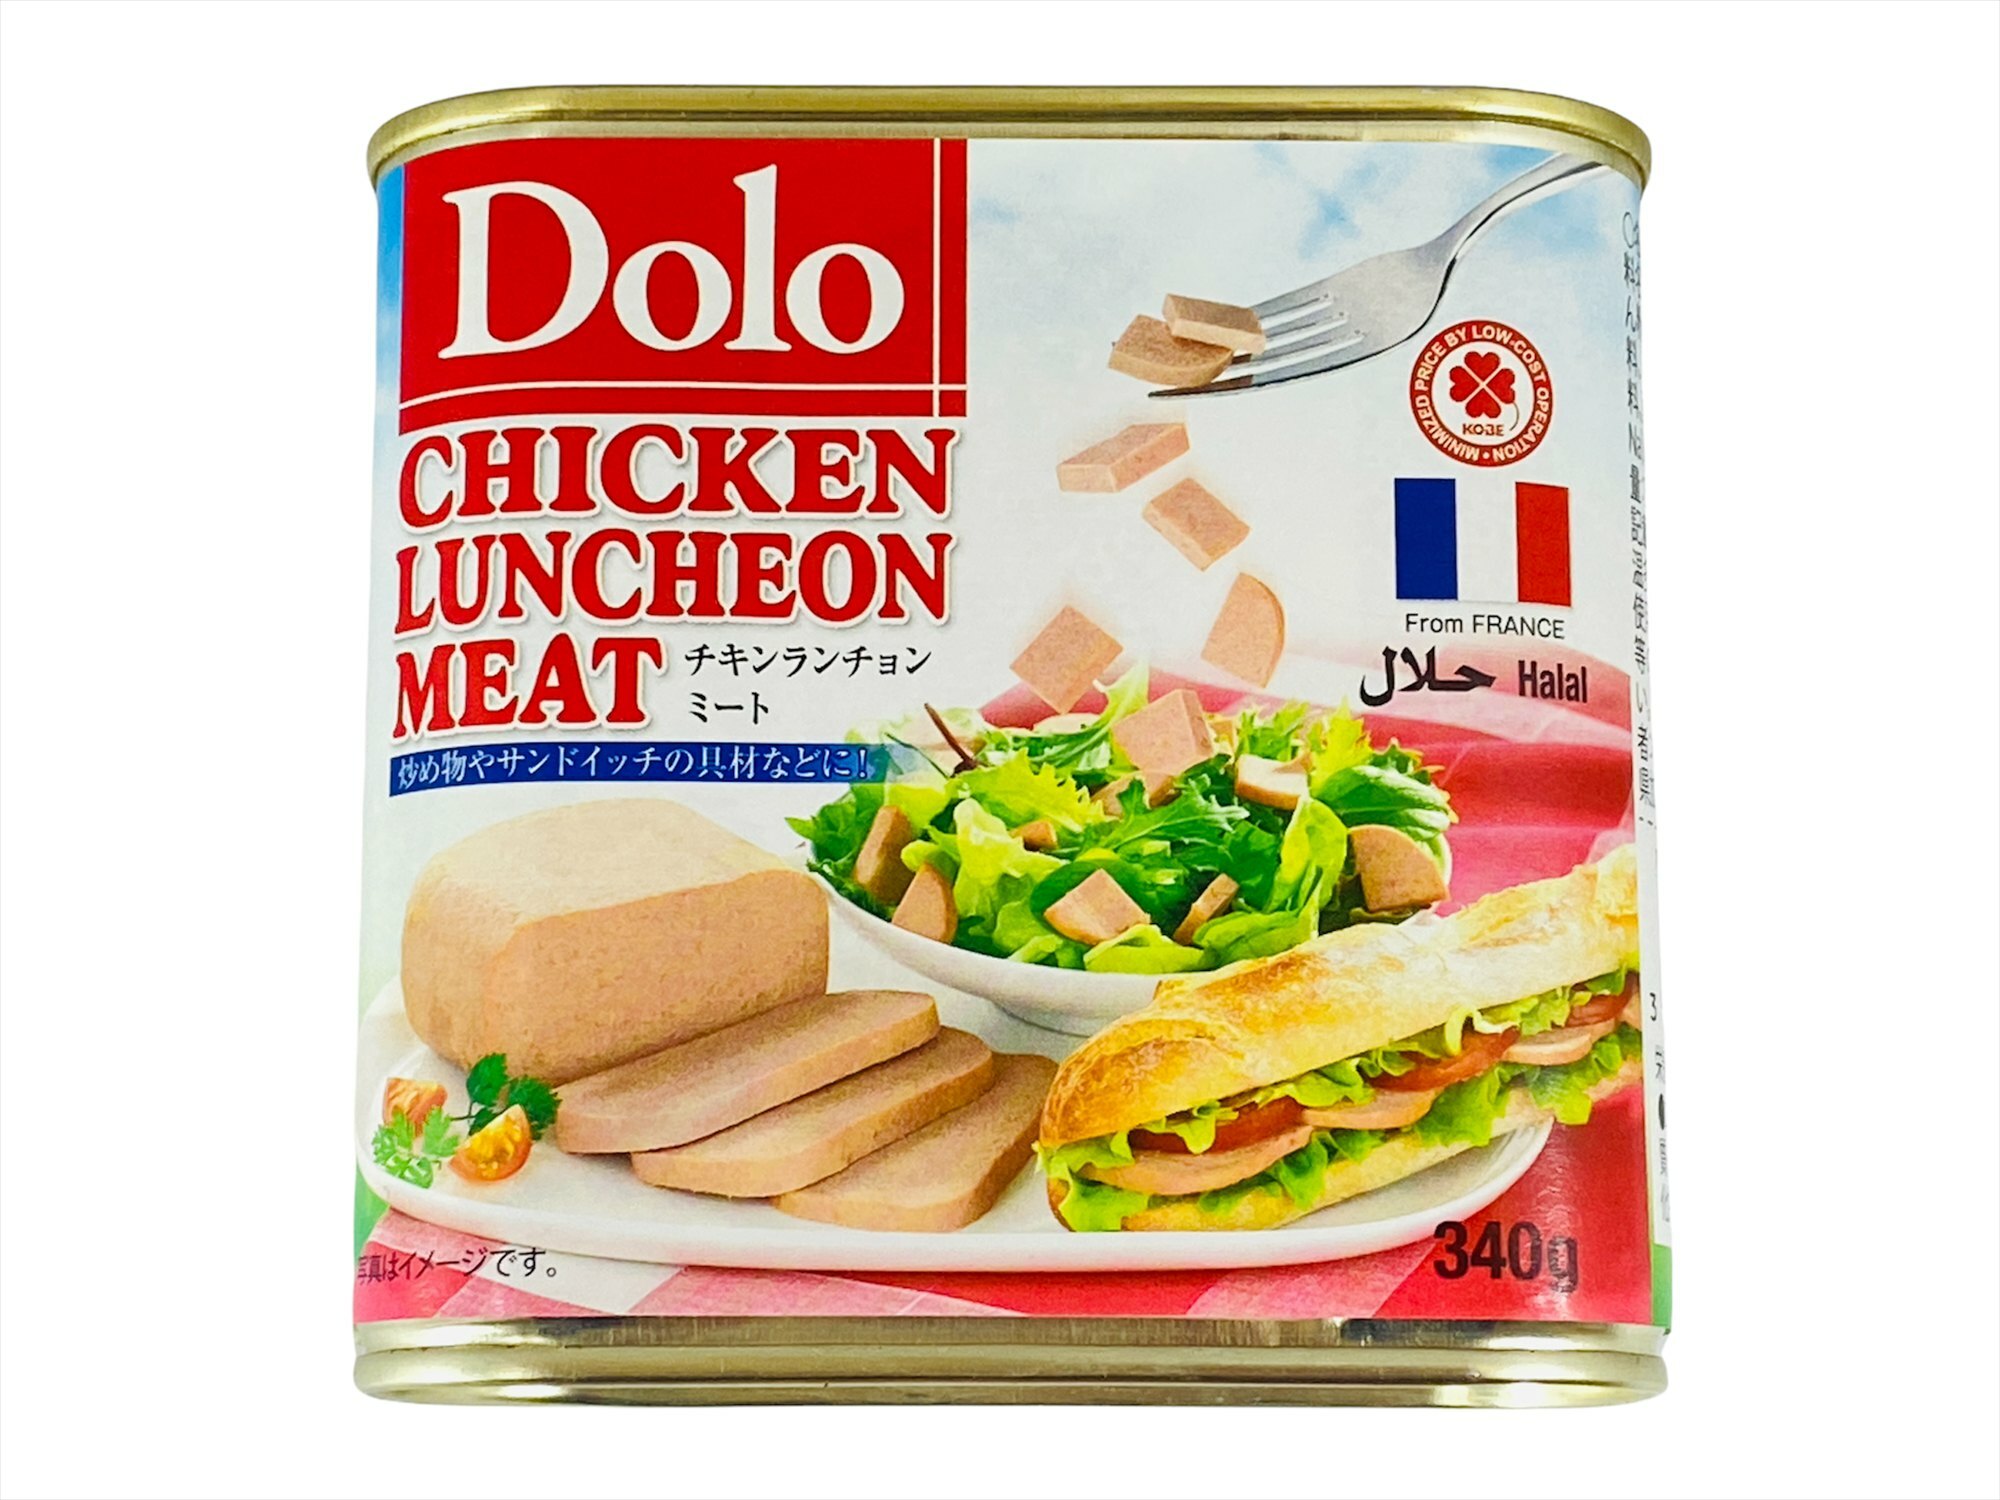 Dolo Chikin Luncheon Meat. Made in France!